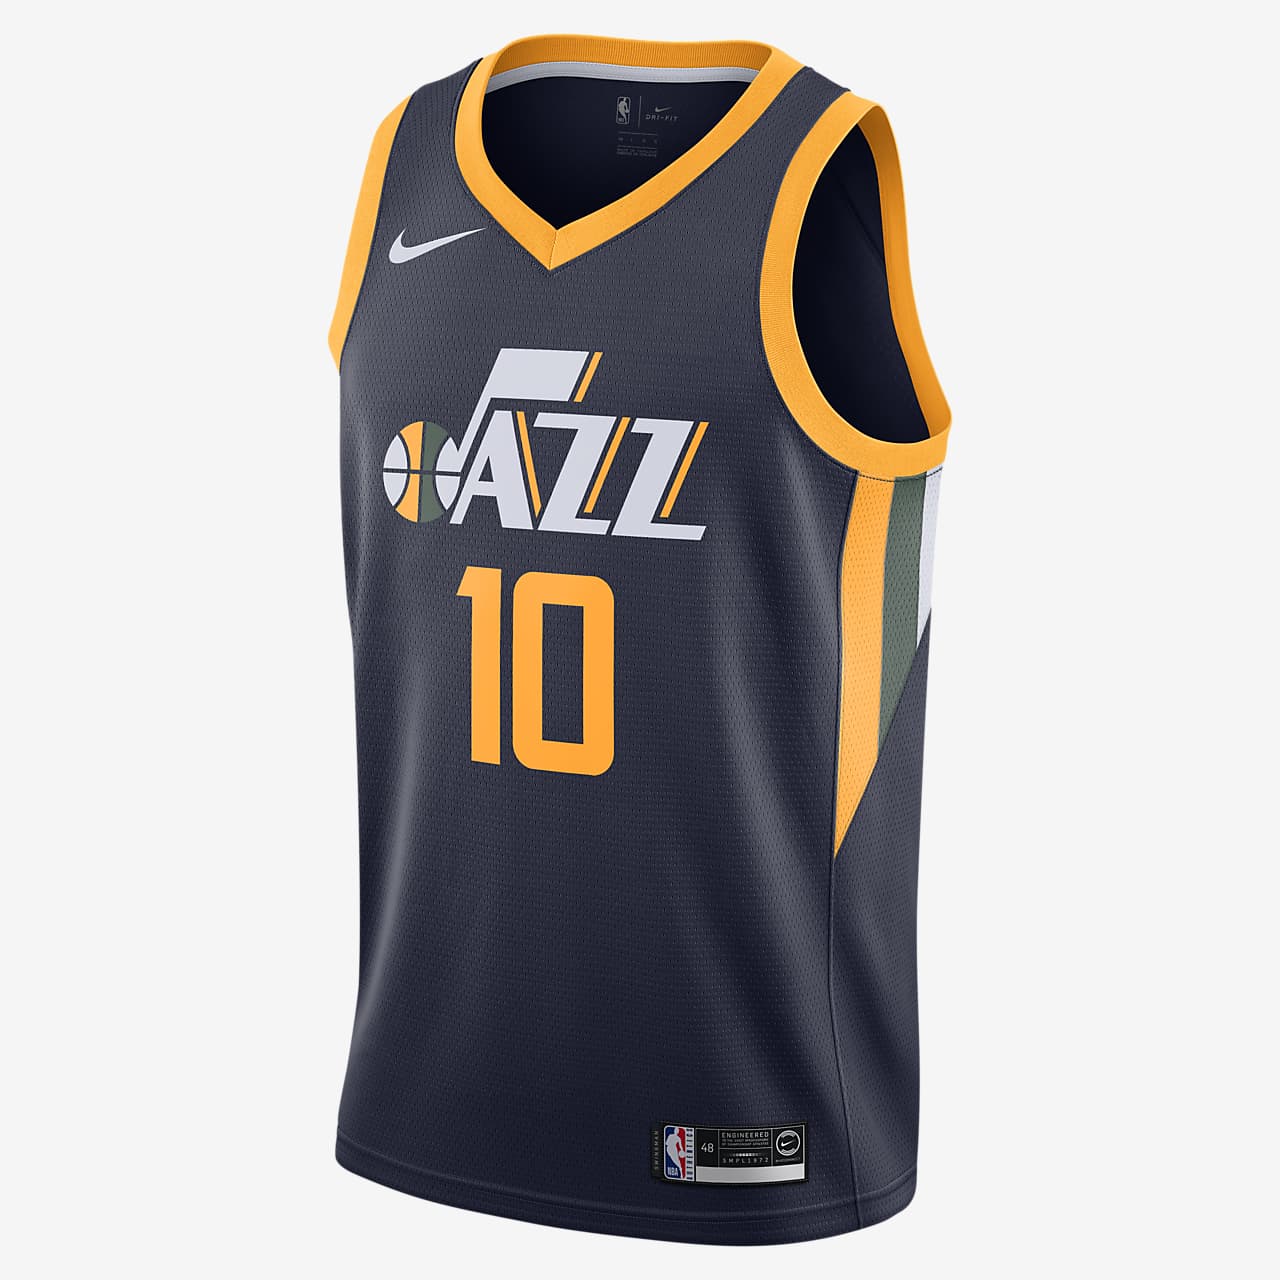 mike conley jersey jazz